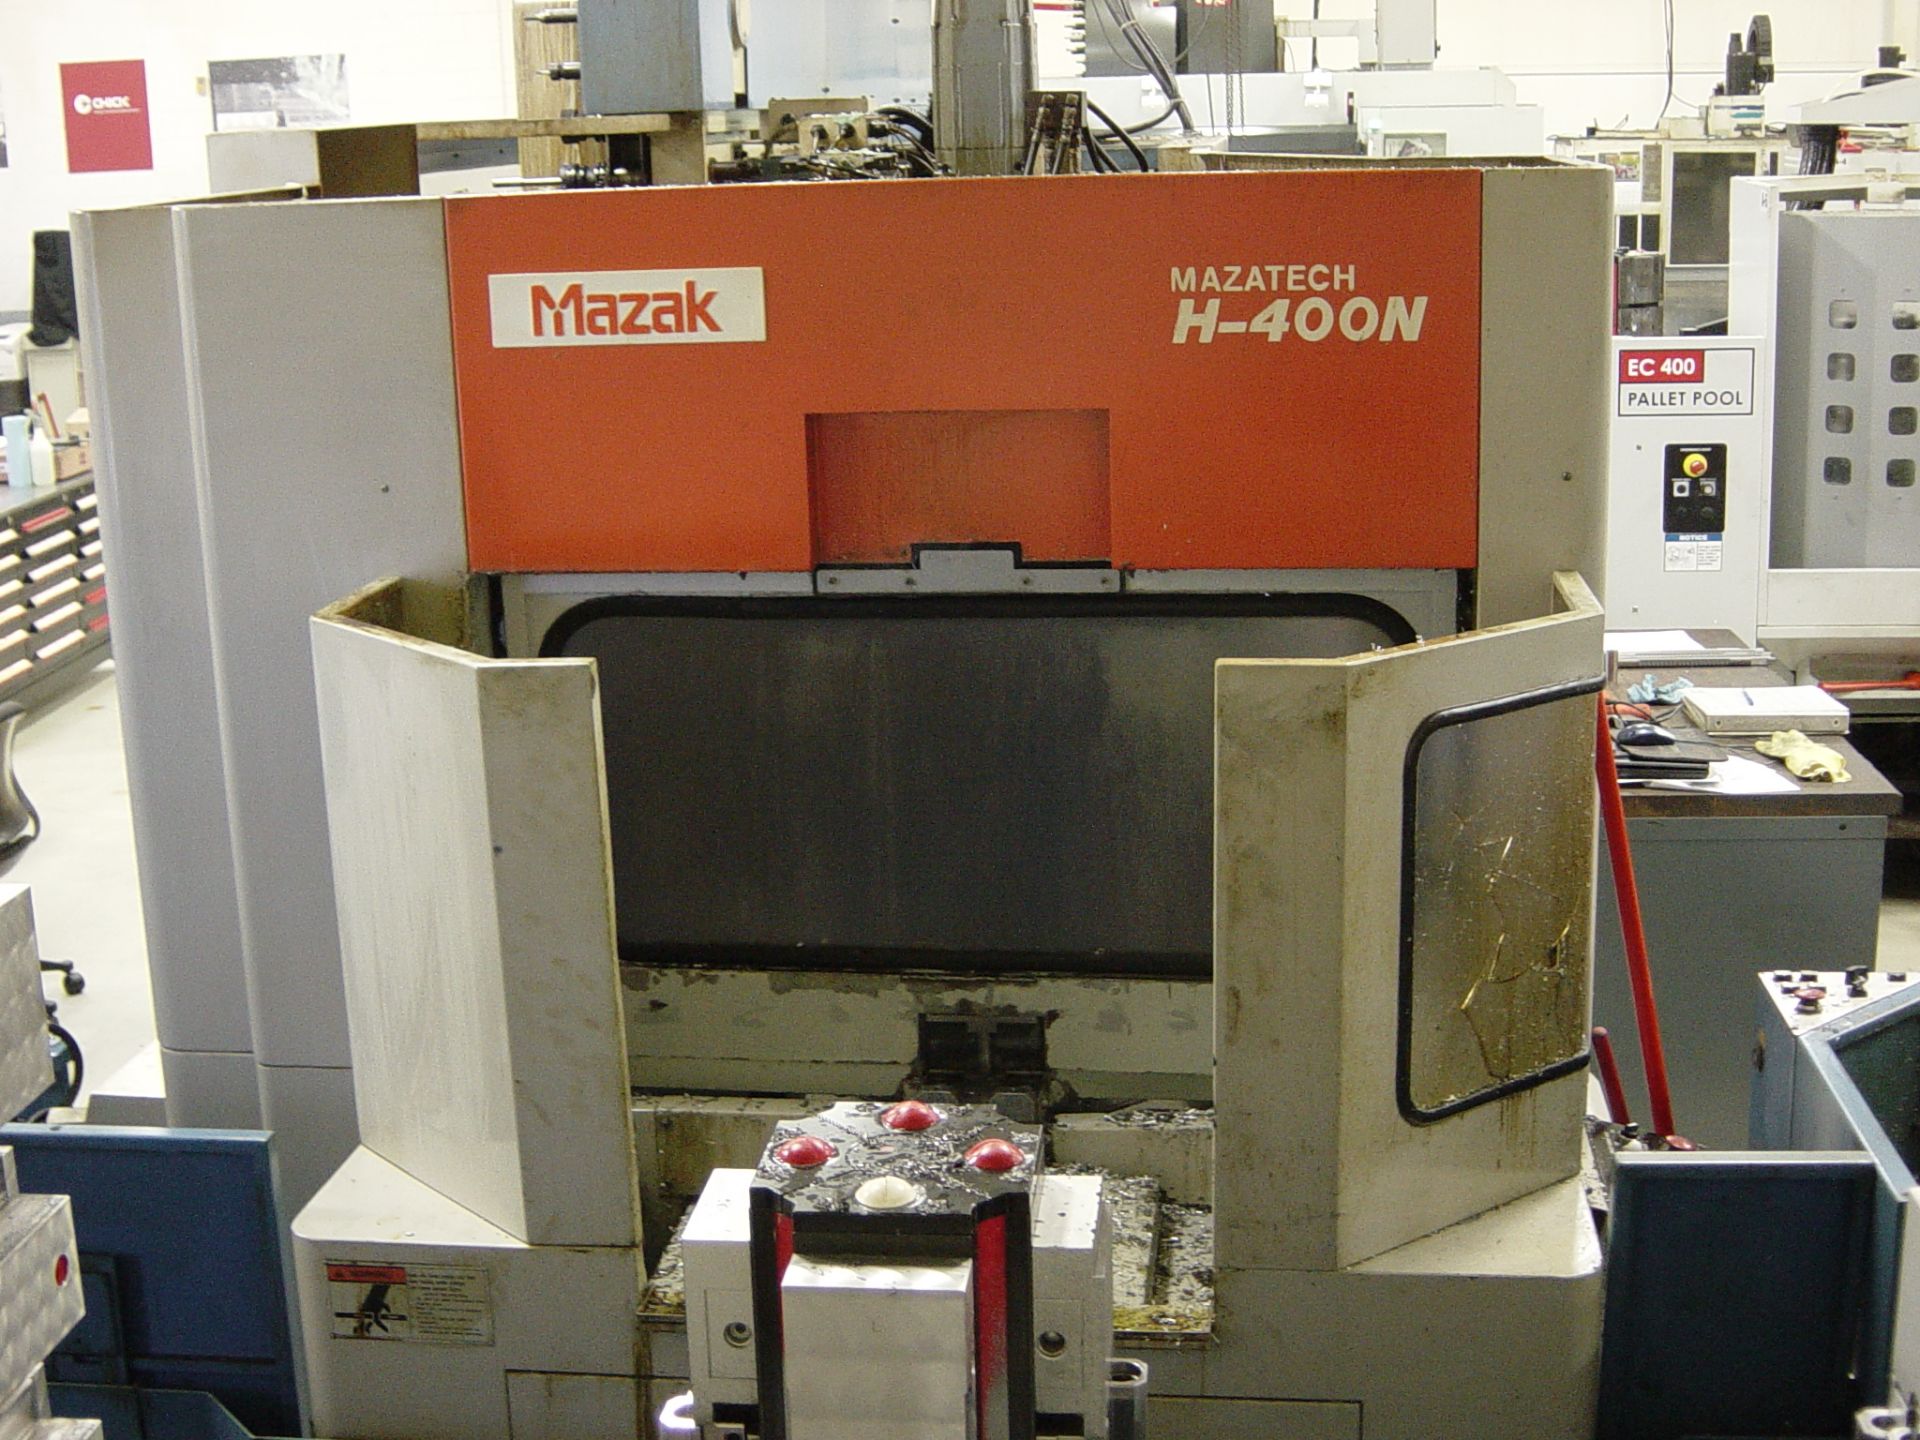 Complete Mazak FMS System with (2) Mazatech H-400N Horizontal Machining Centers, S/N 117943 - Image 2 of 7